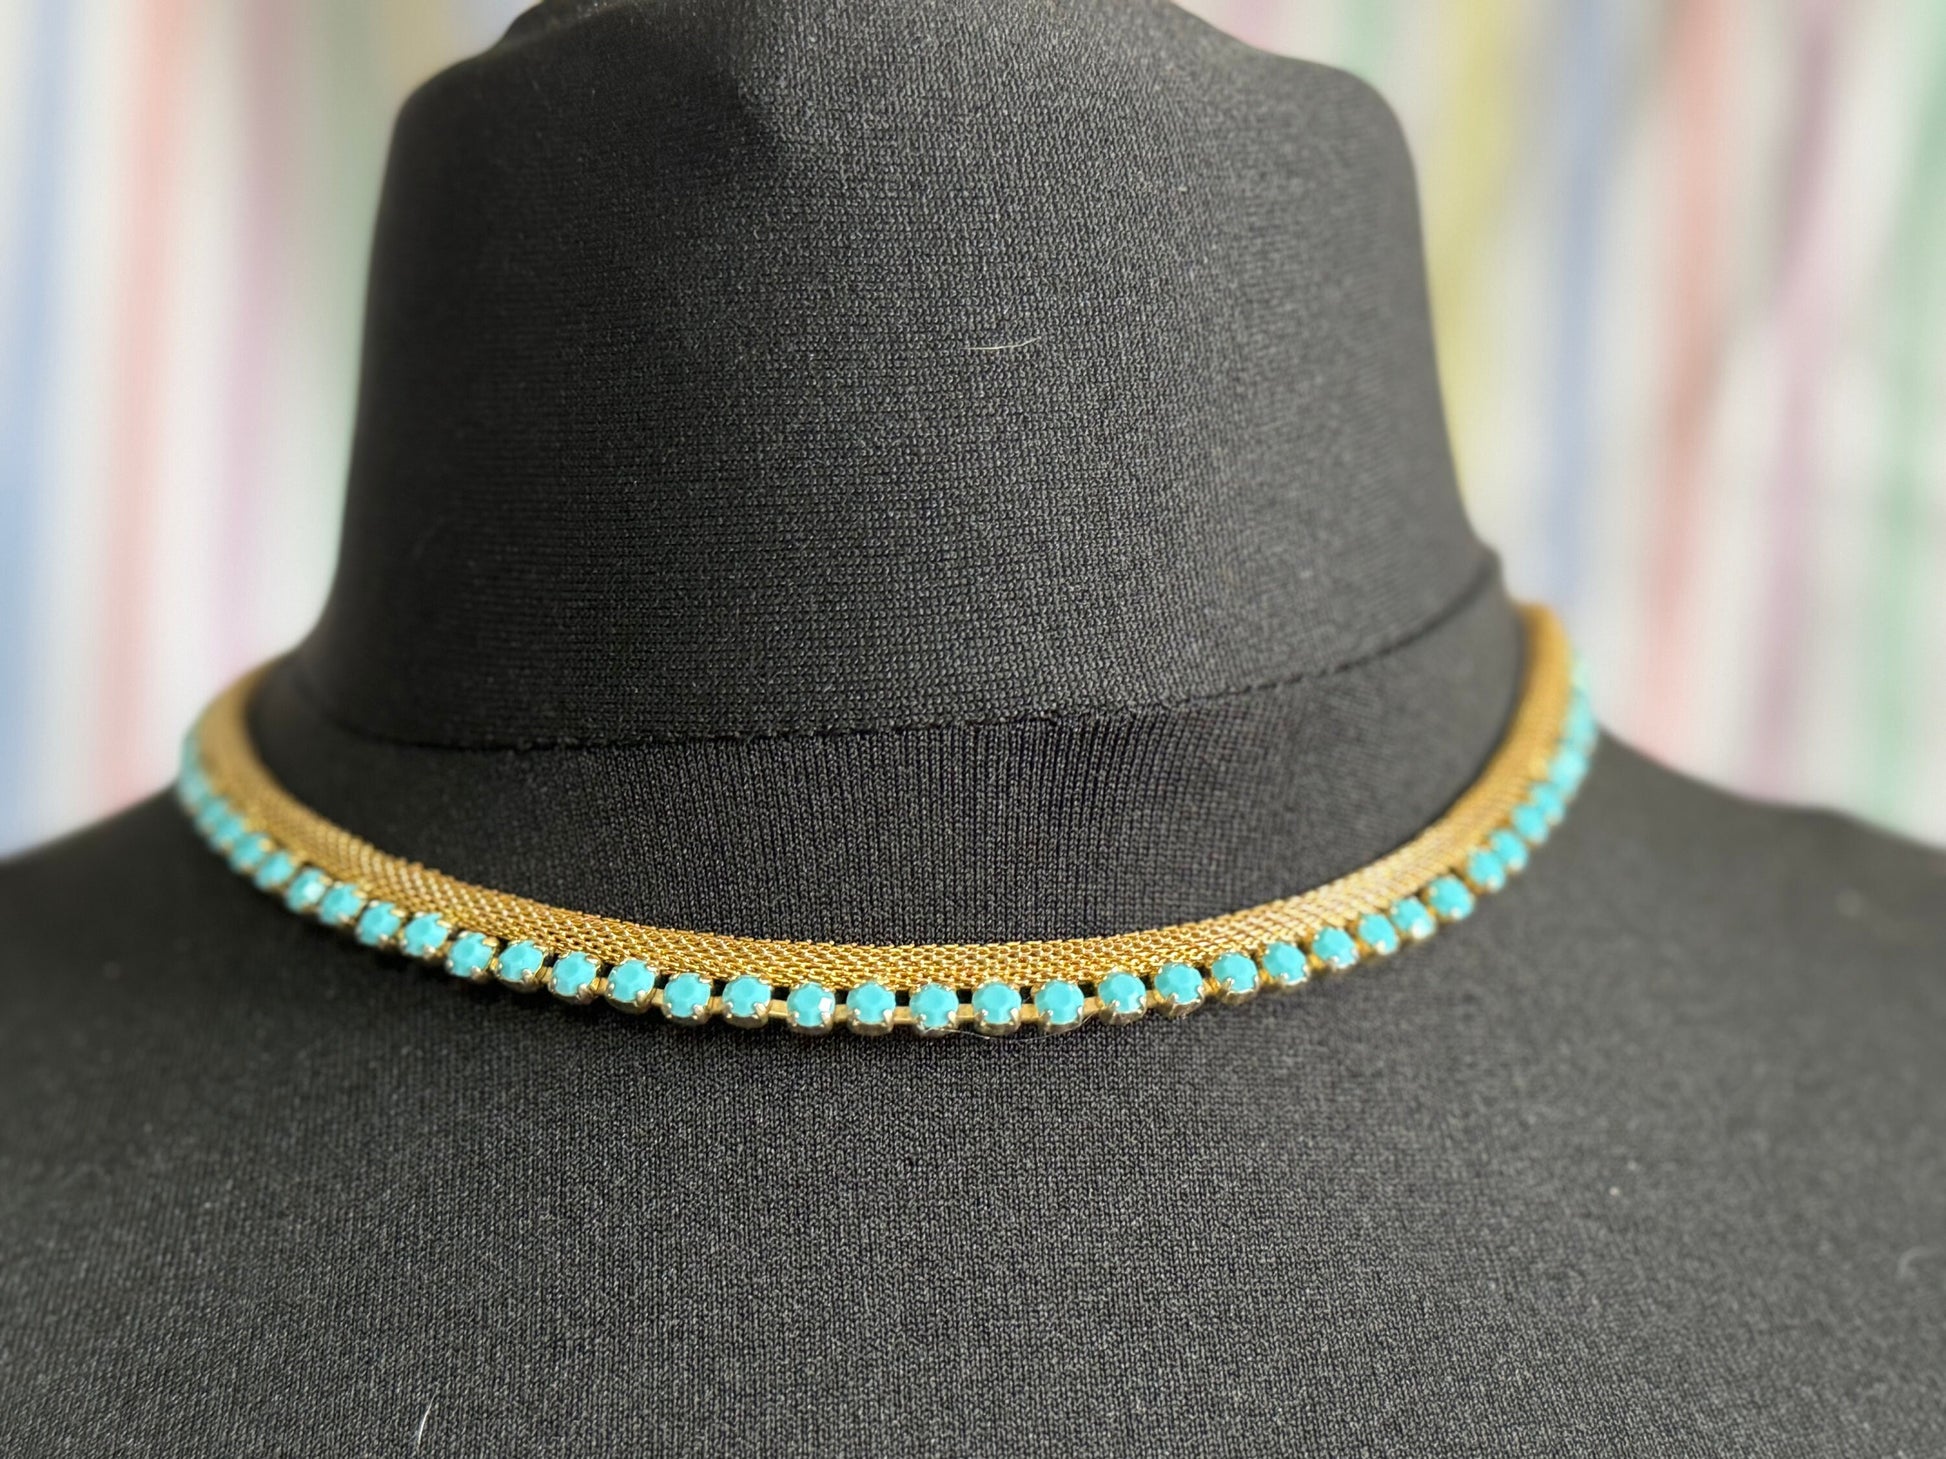 Vintage 1960s gold tone mesh chain choker necklace turquoise stones